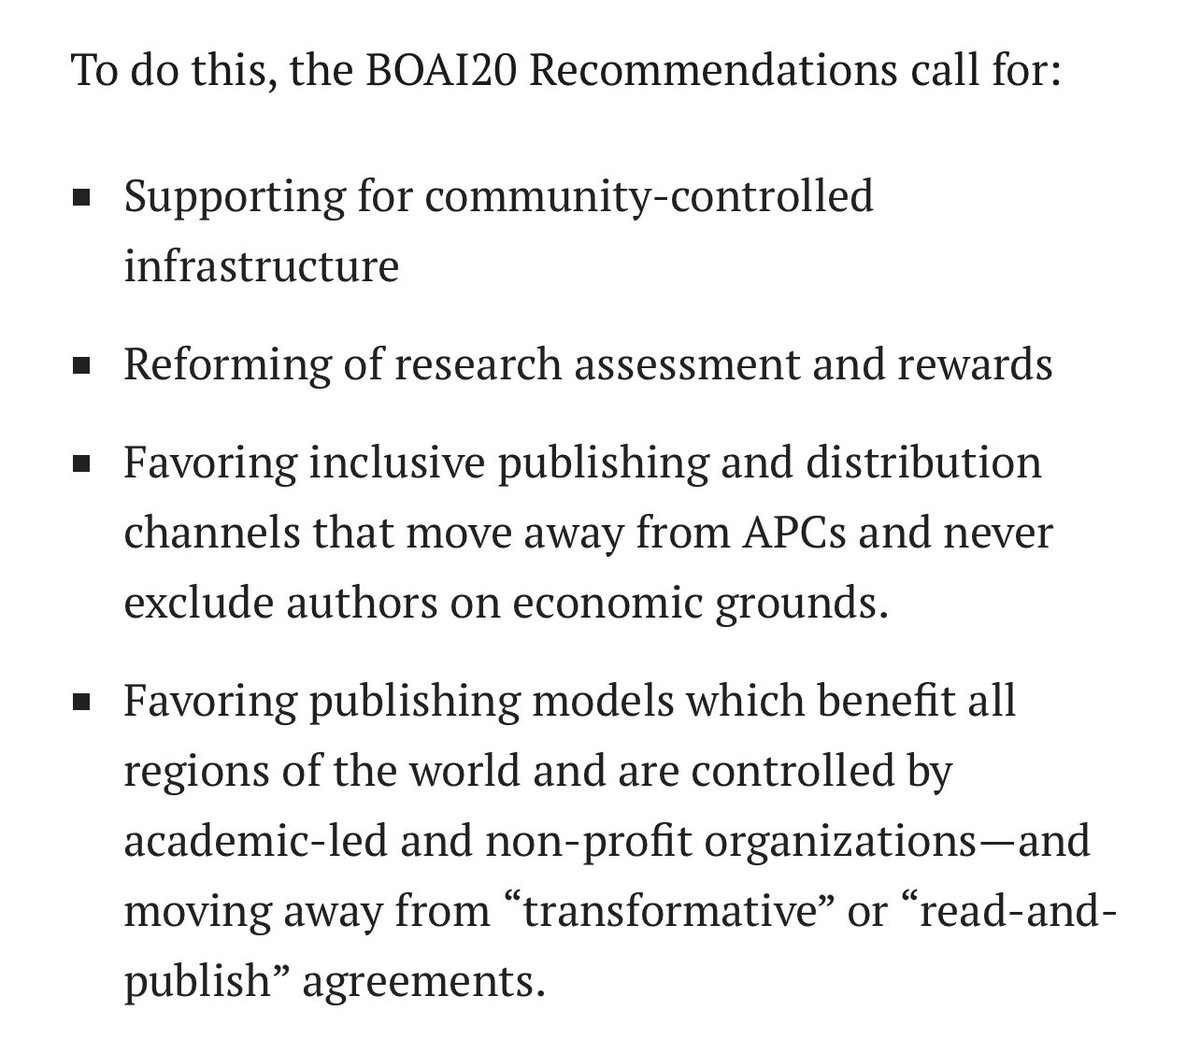 Important recommendations to better foster #openaccess